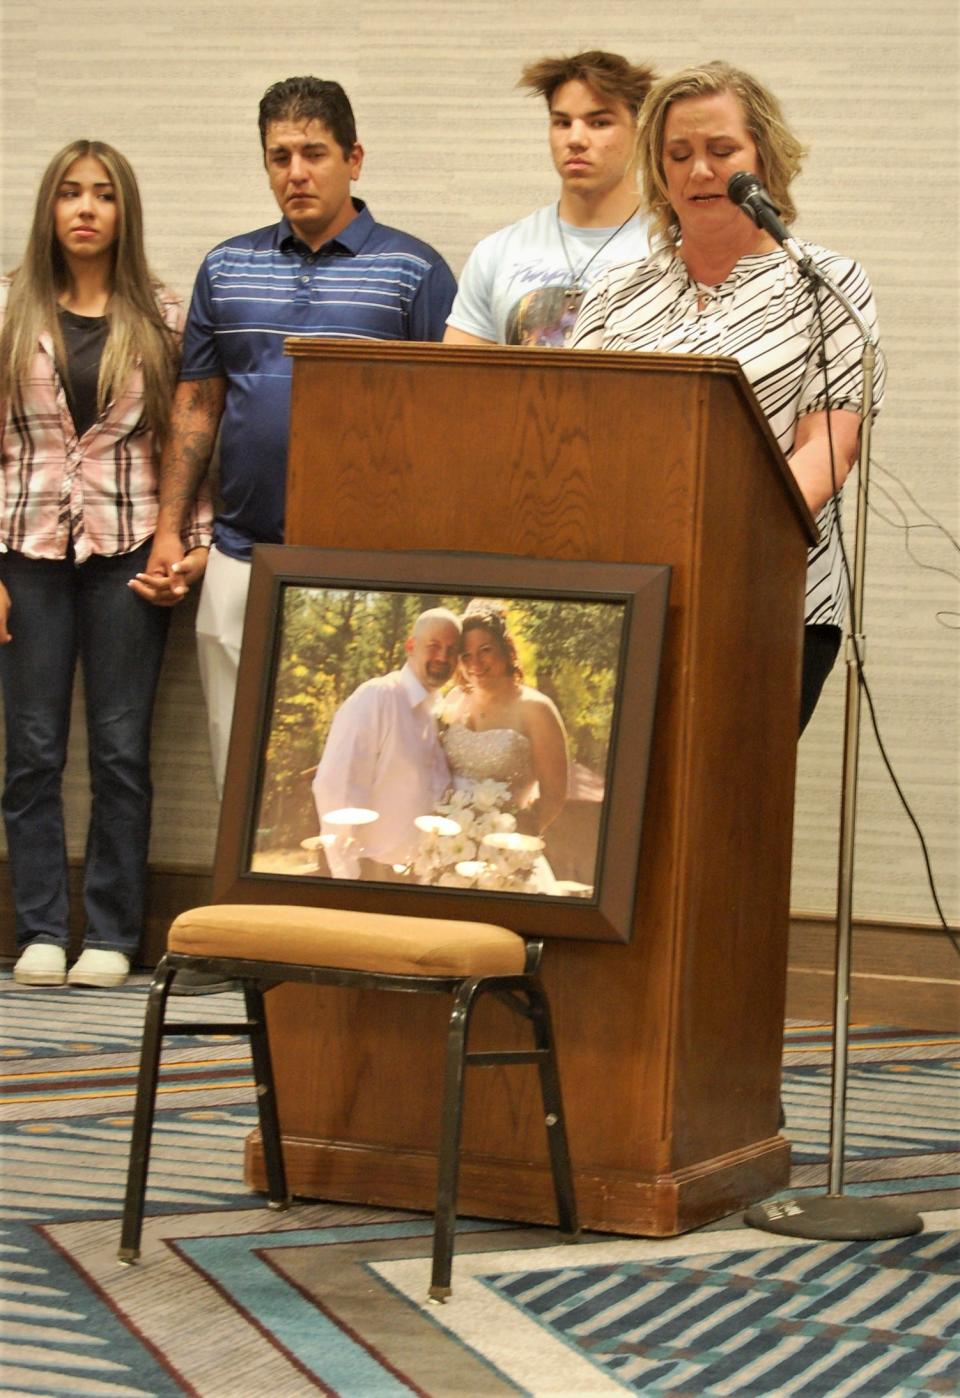 With members of her family standing nearby, Kim Dotson -- the widow of shooting victim Robert Dotson -- speaks during a Thursday, April 20 press conference at the Courtyard by Marriott hotel in Farmington.